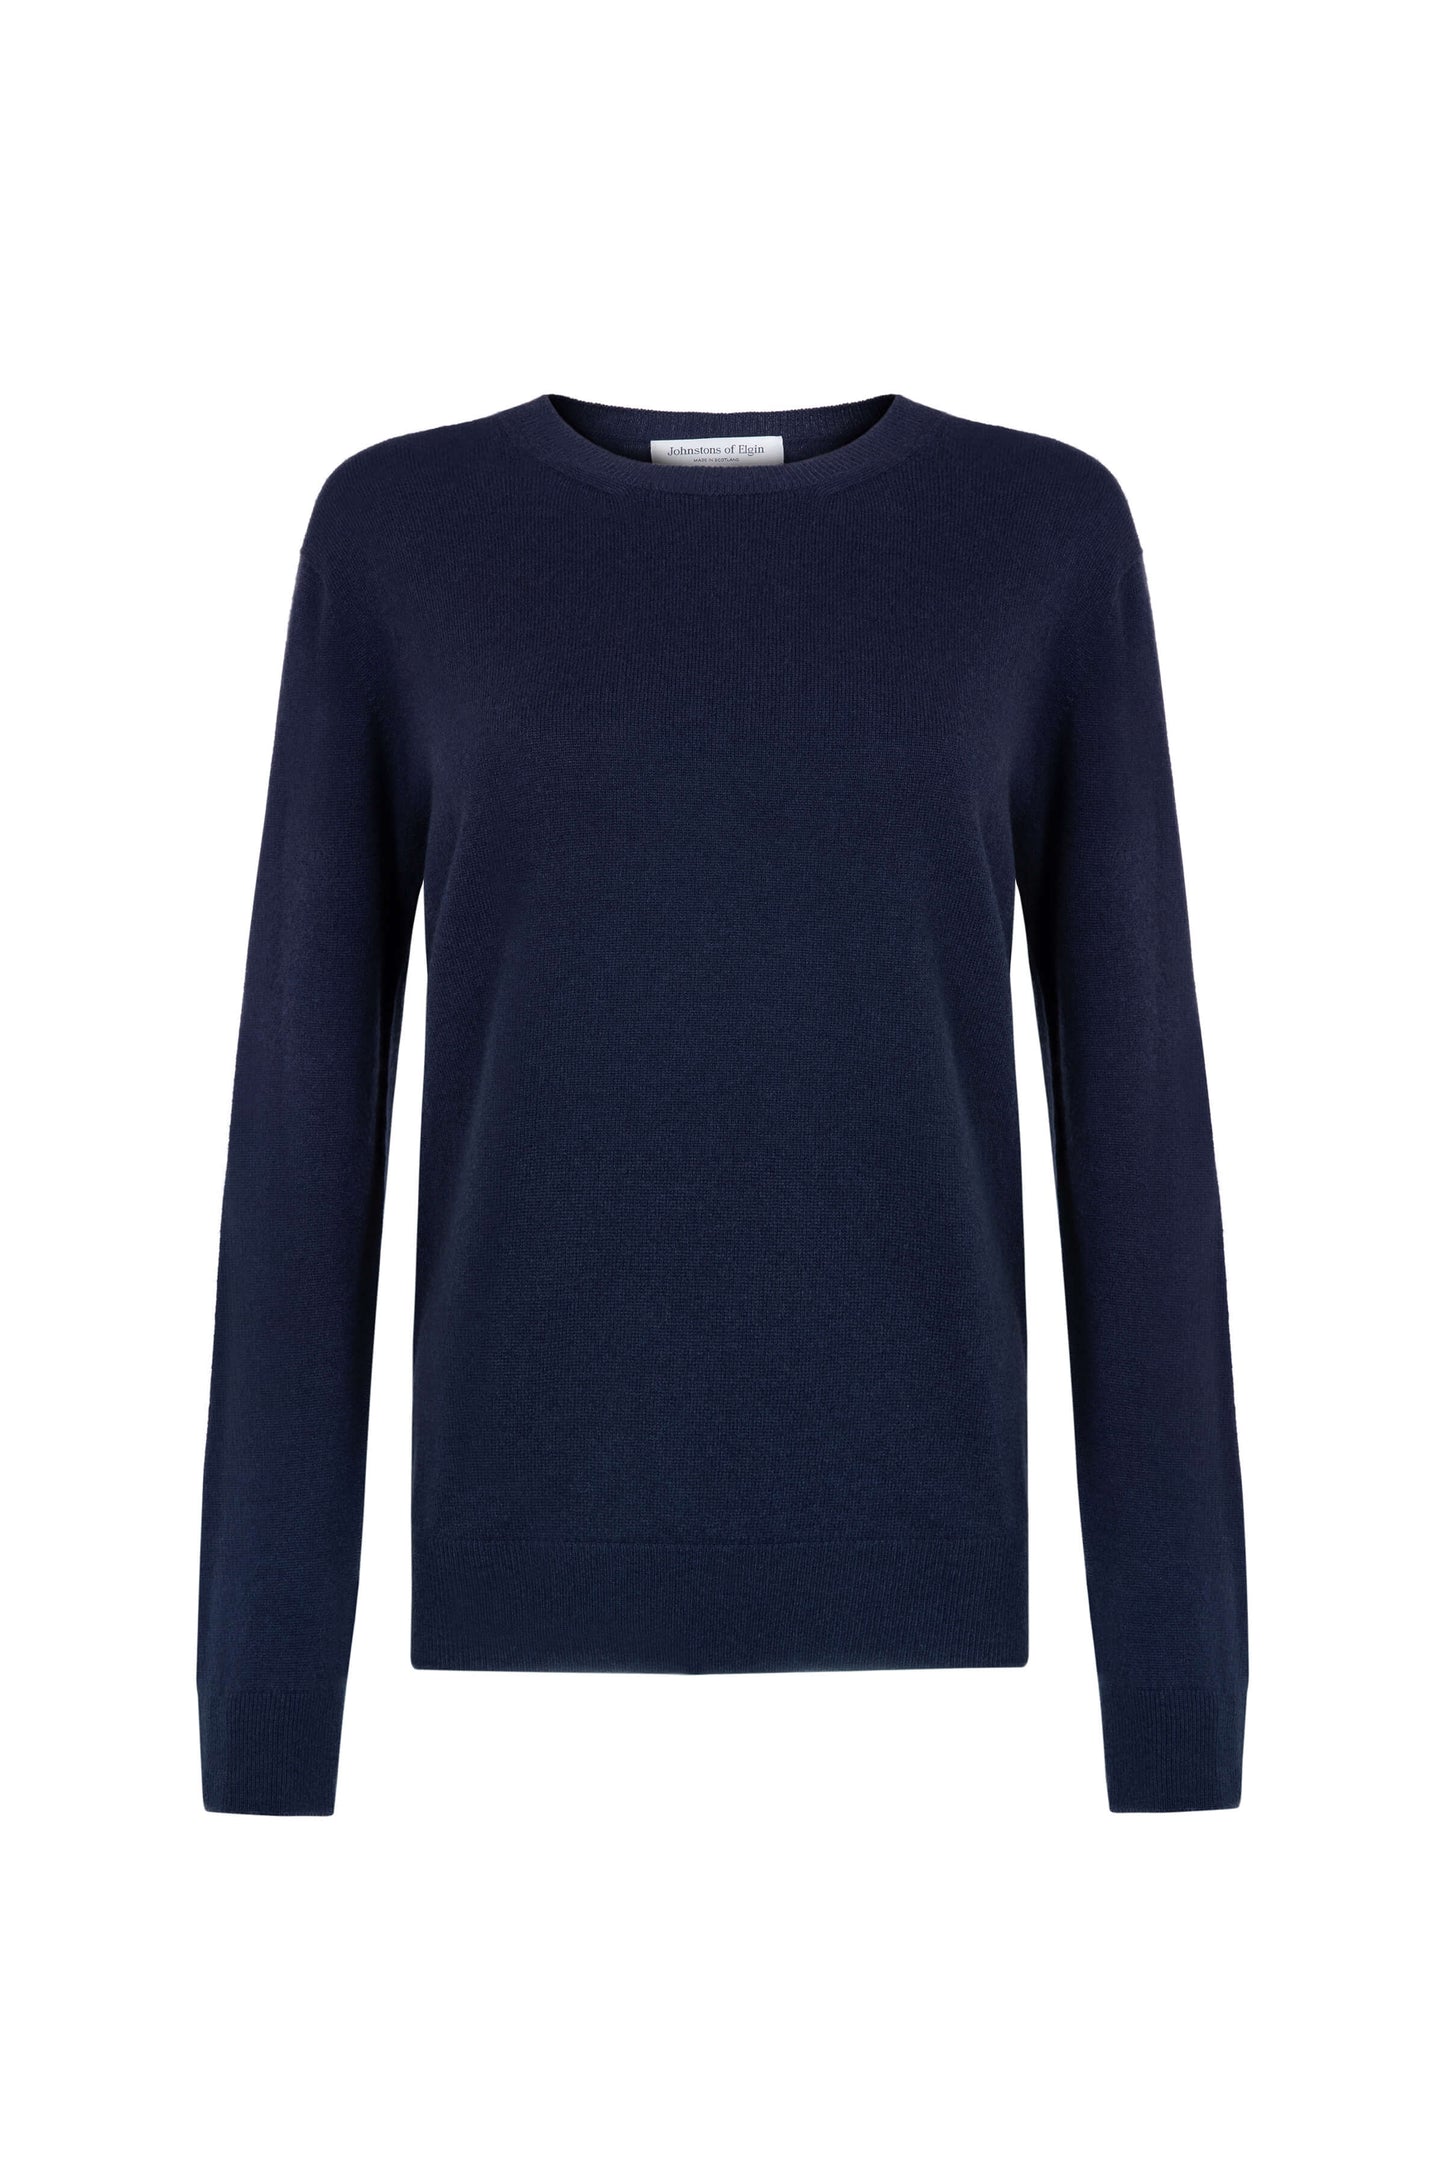 Johnstons of Elgin Womens Knitwear Navy Blue Classic Cashmere Crew Neck KAI05139SD0707